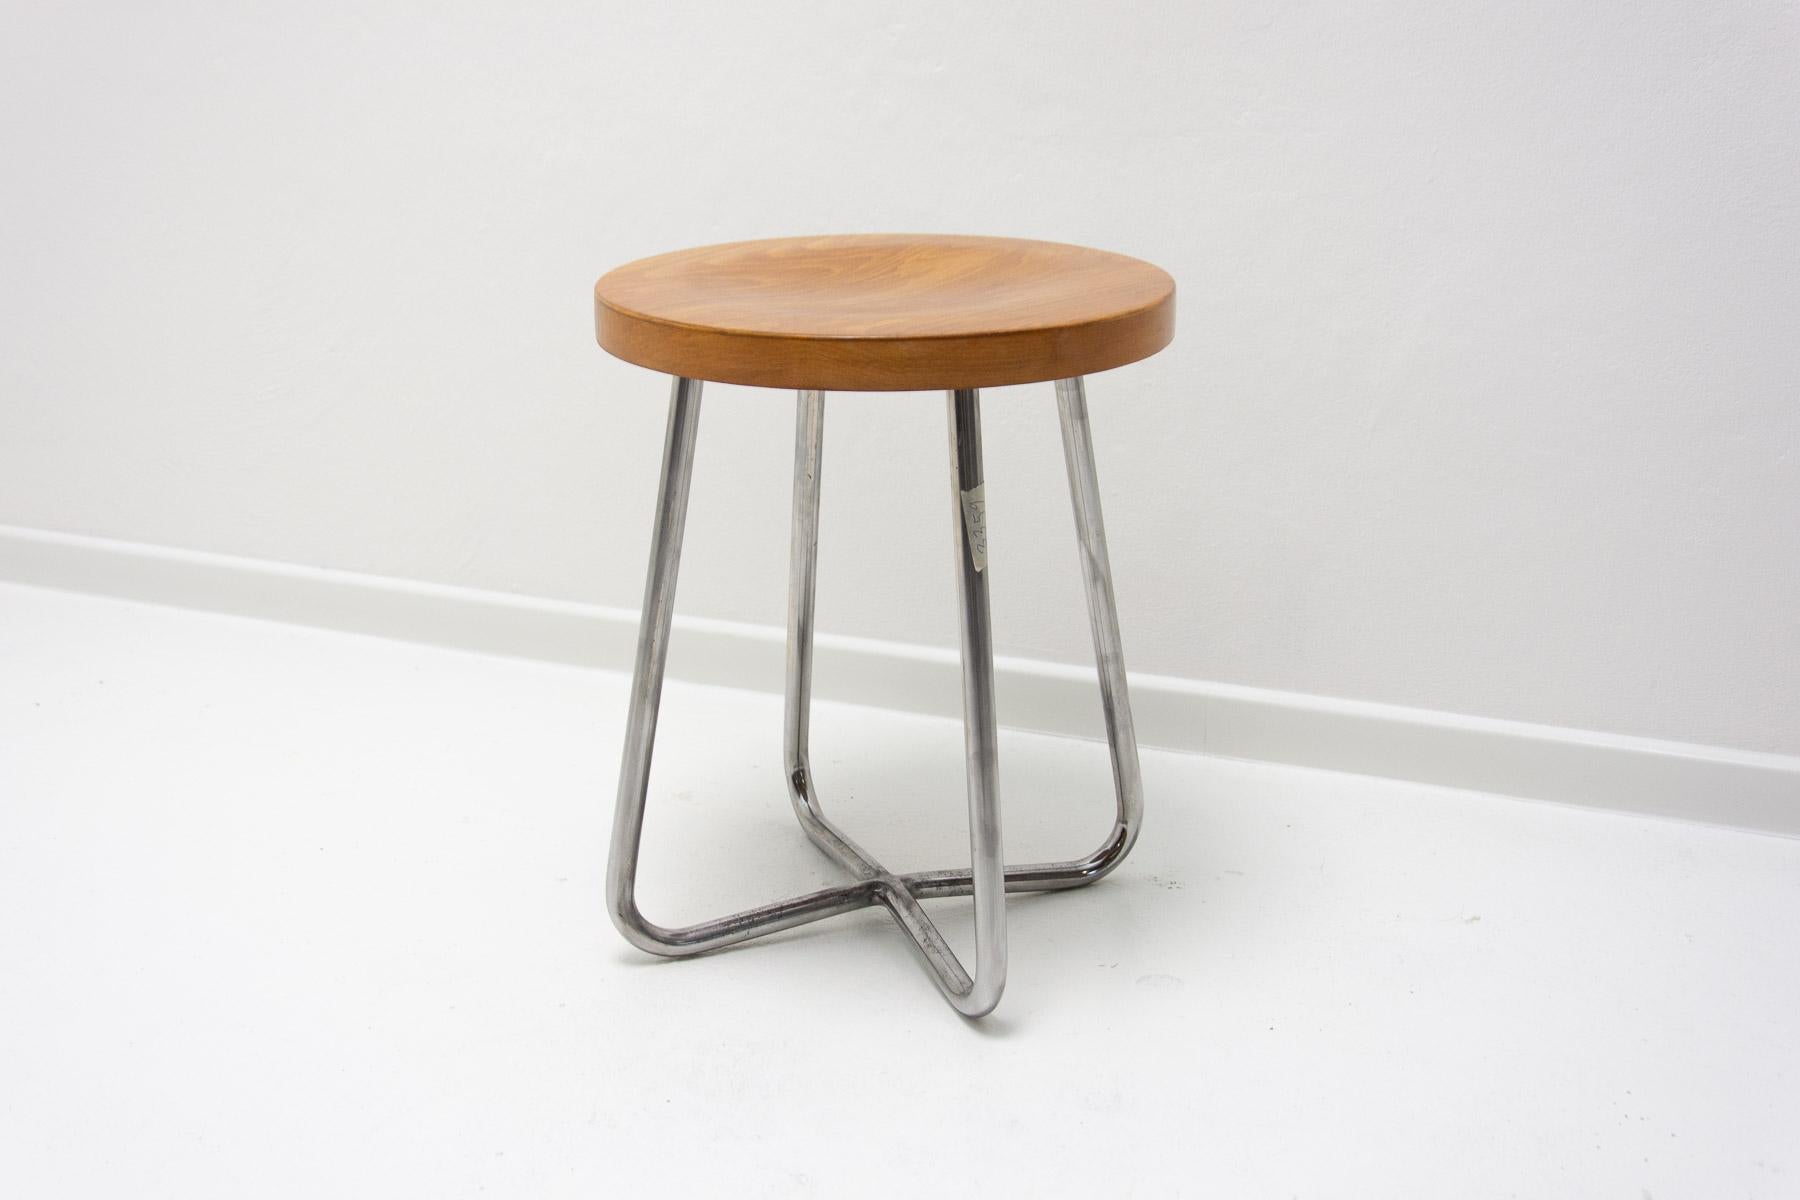 This chrome-plated stool was made by Slezák company, which focused on the production of tubular furniture, in the 1930s. It was manufactured in the former Czechoslovakia.

This is an expertly restored original, painted in a high gloss to the shade